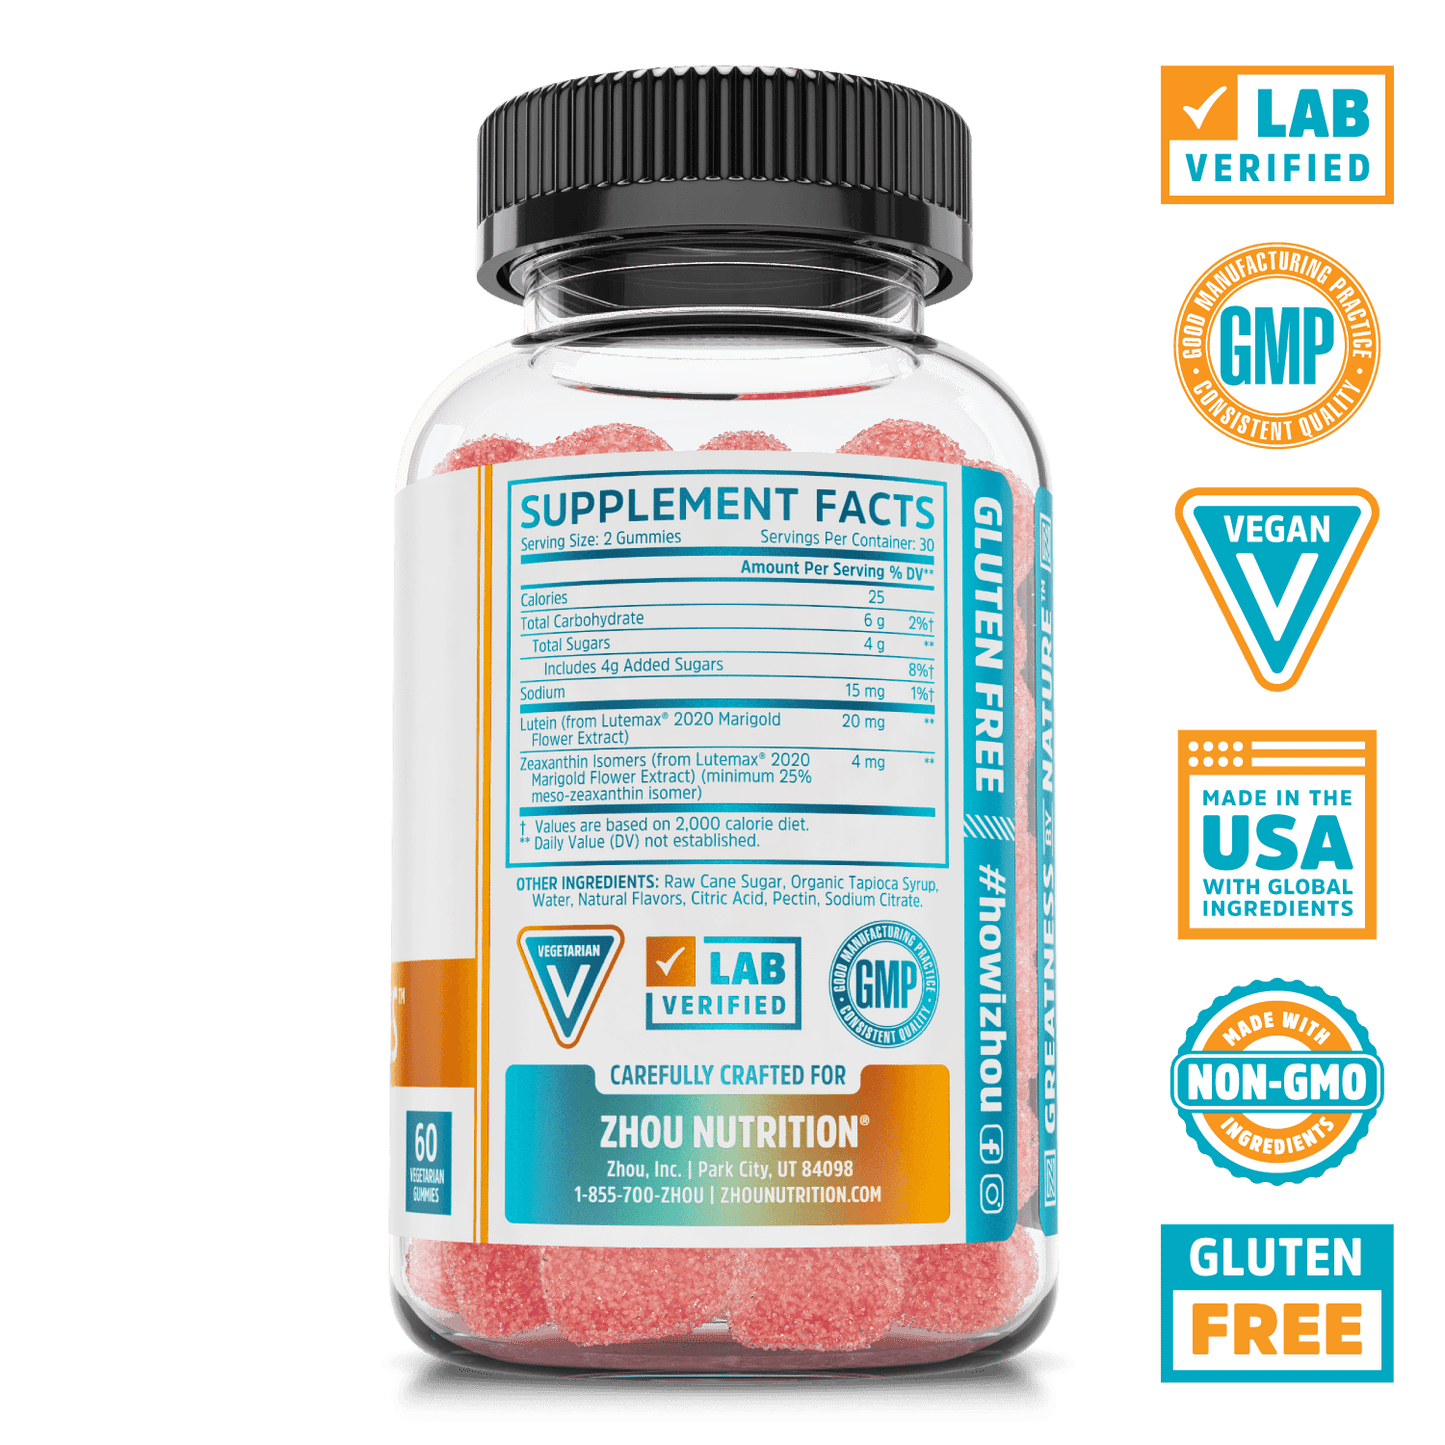 Zhou Nutrition Screen Eyes Gummies for Macular Strength and Blue Light Exposure.  Lab verified, good manufacturing practices, vegan, made in the USA with global ingredients, made with non-GMO ingredients, gluten free.